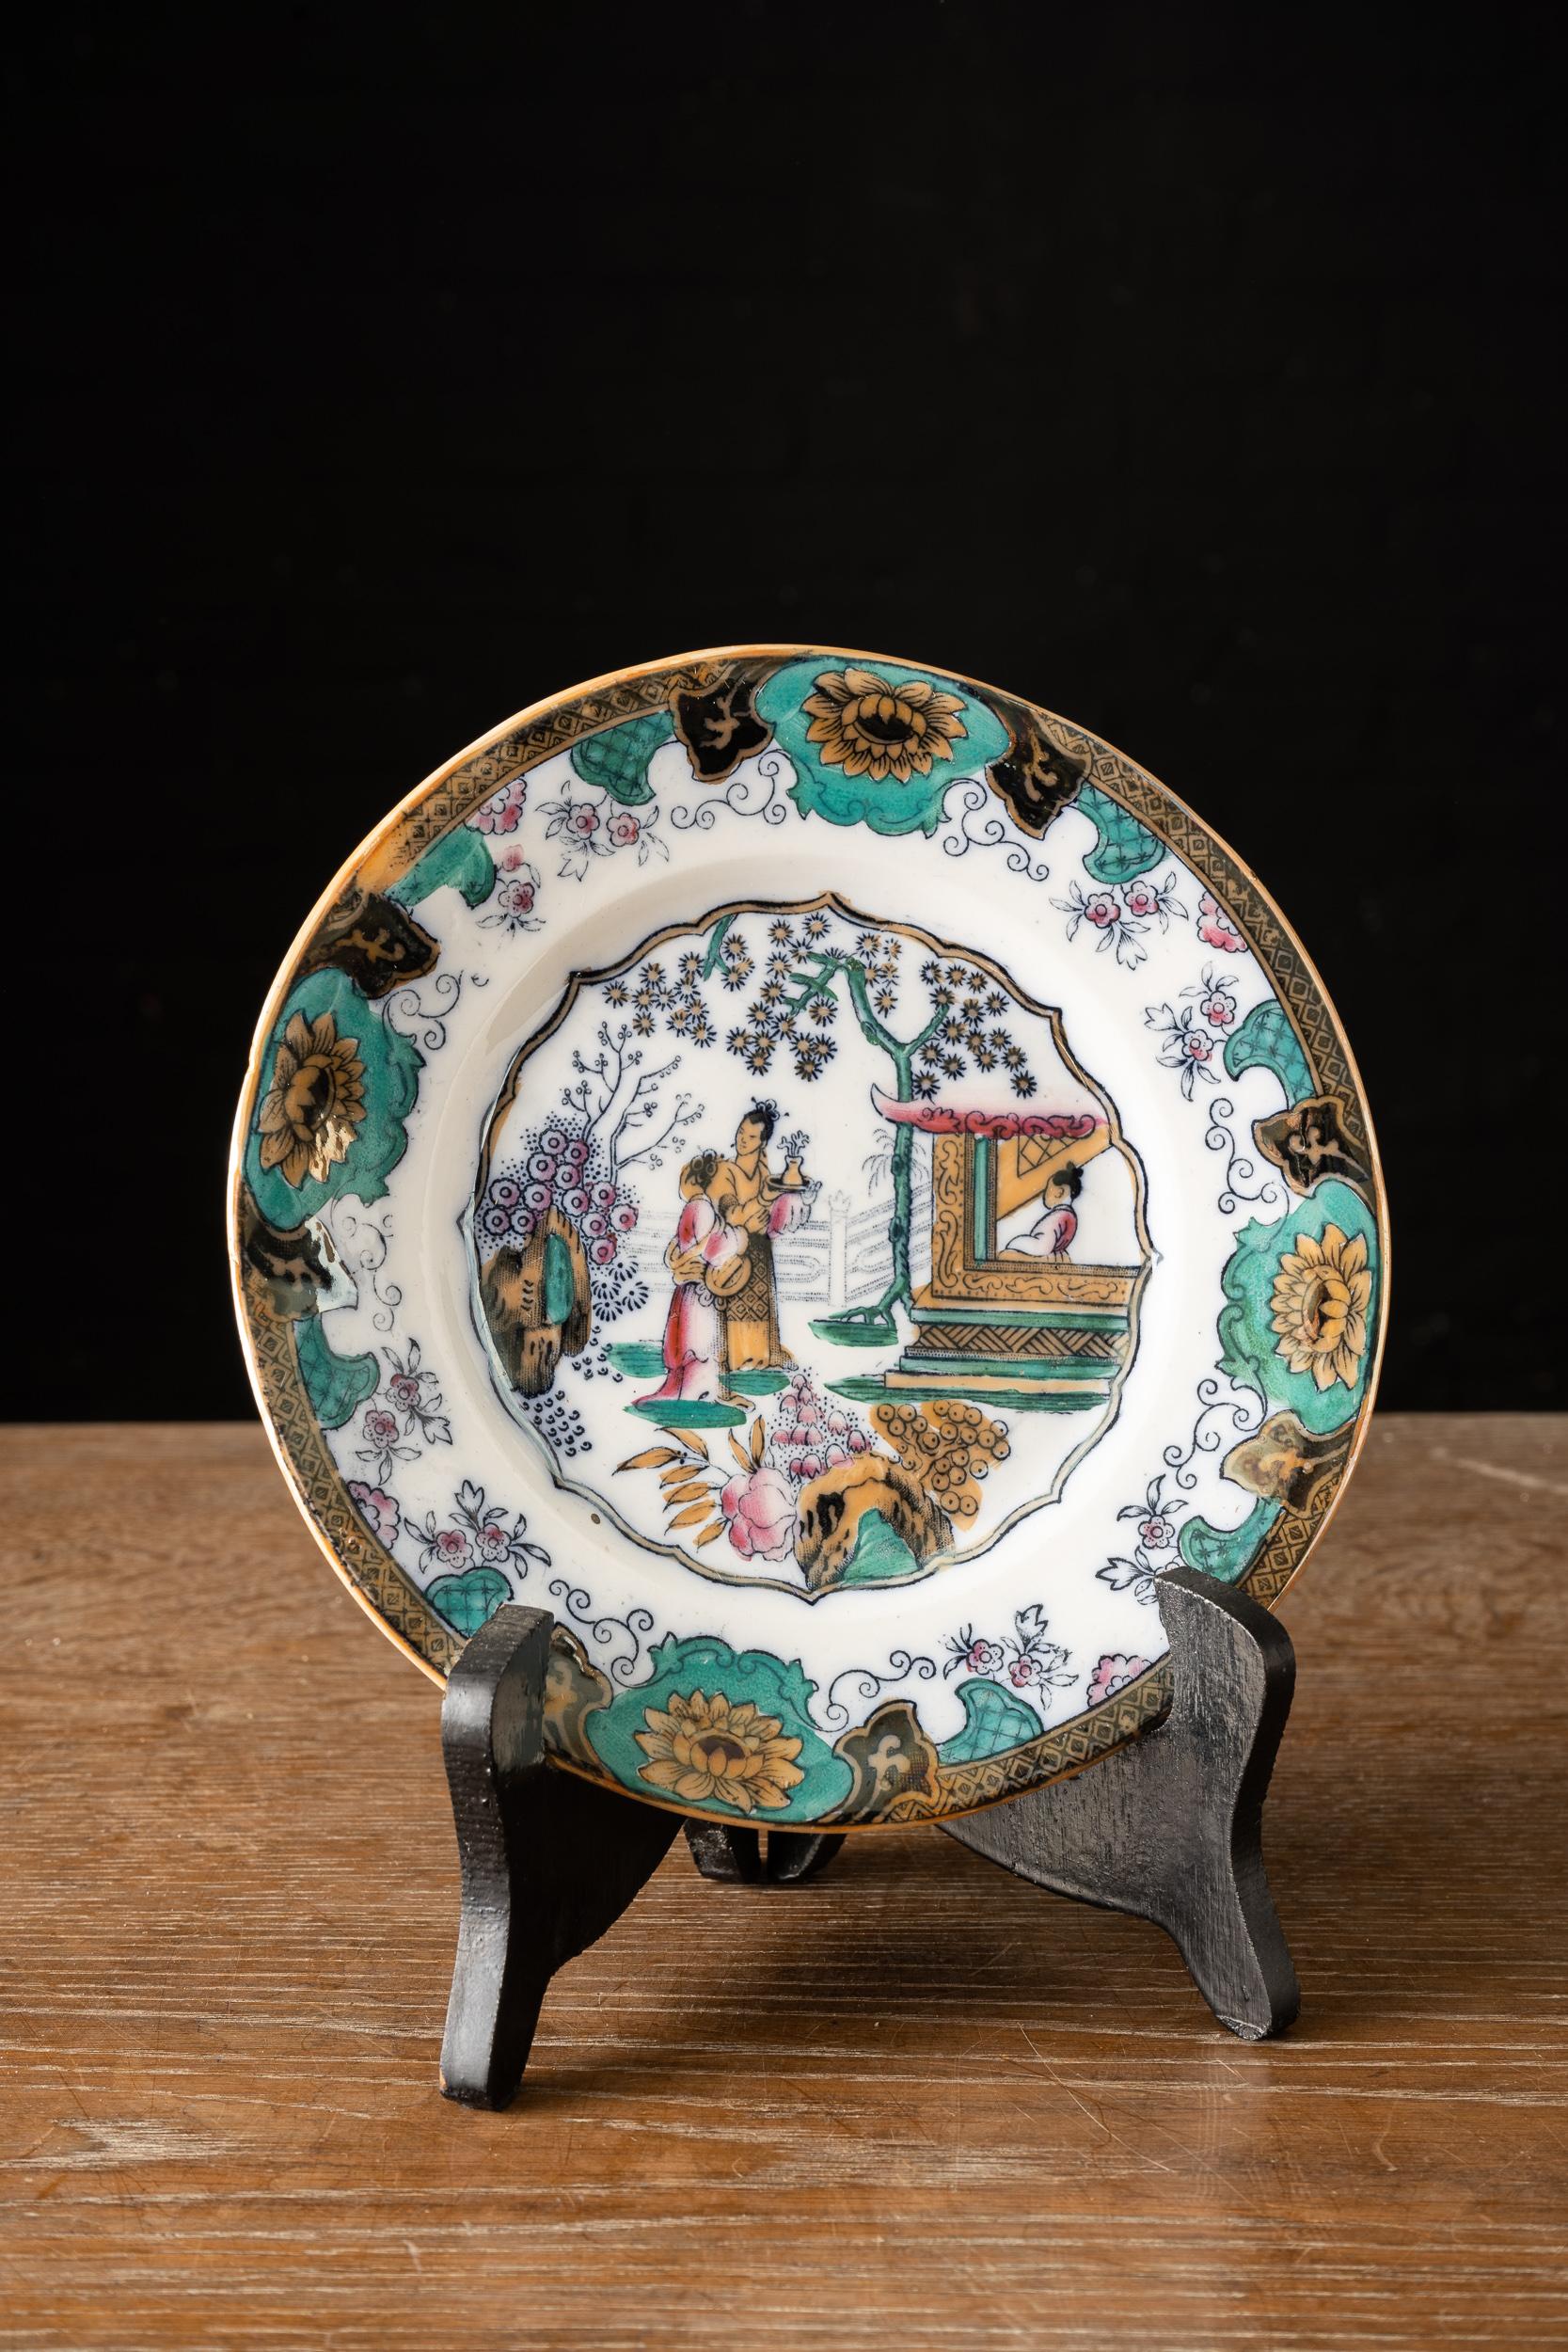 Brand Canton B F.
Handpainted, depiction of an Asian scene. 

Boch Freres Canton pattern mark ca. 1850 - 1880.